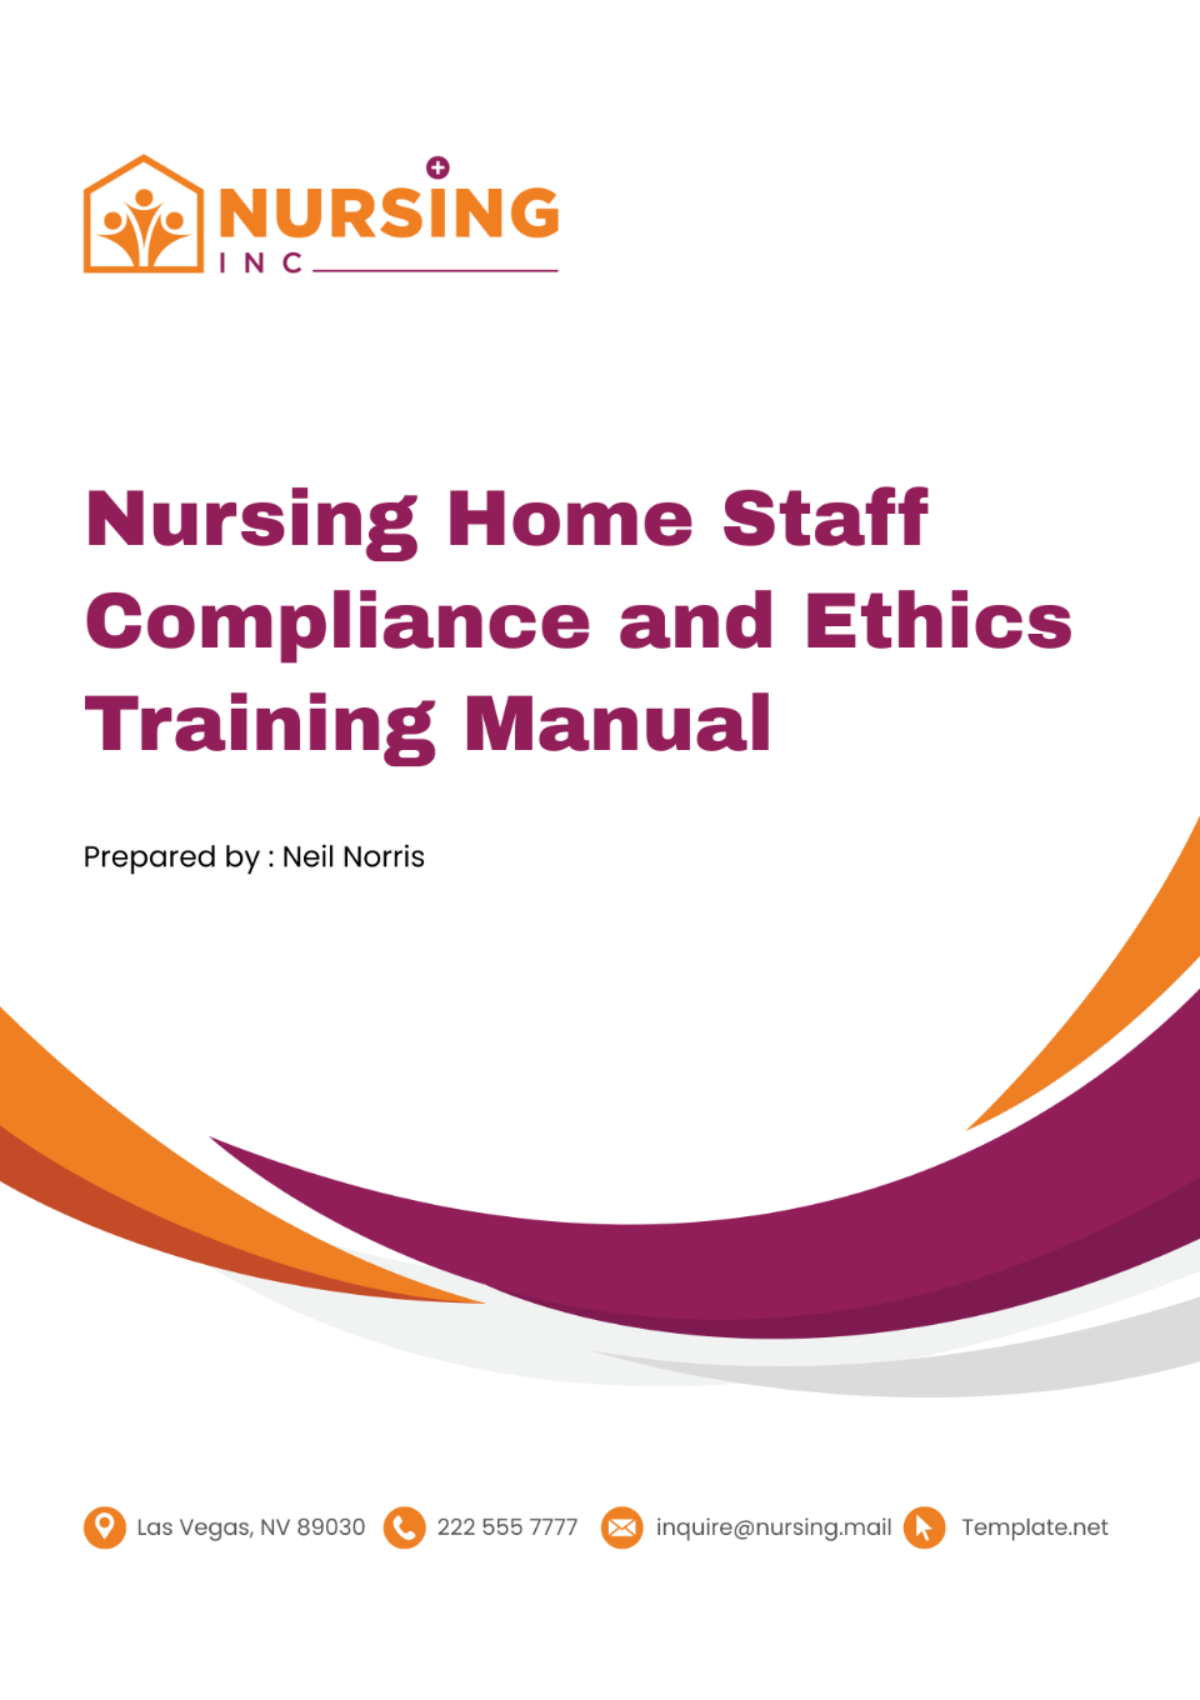 Nursing Home Staff Compliance and Ethics Training Manual Template